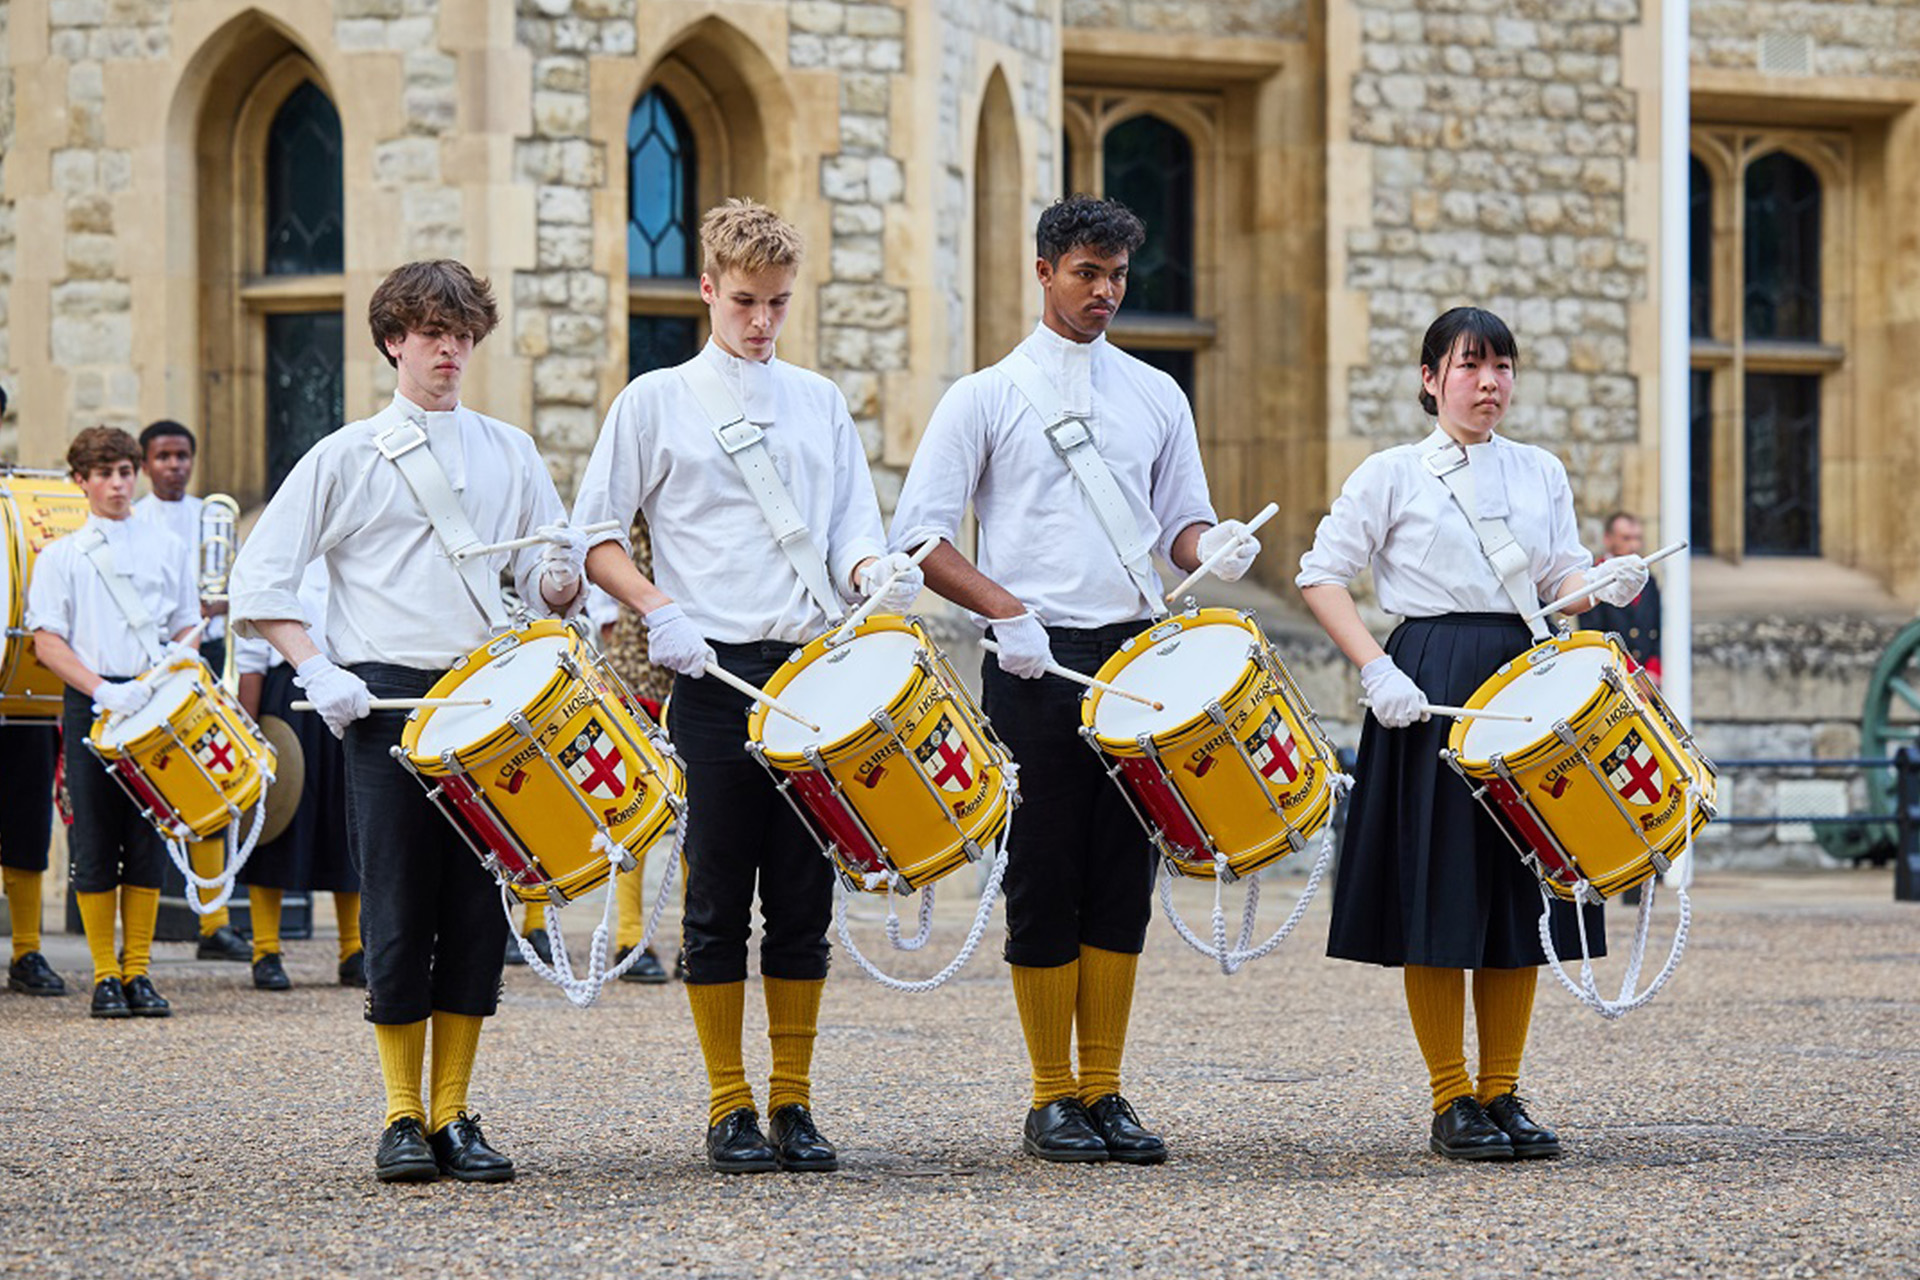 Christ's Hospital Band performing at the Tower of London